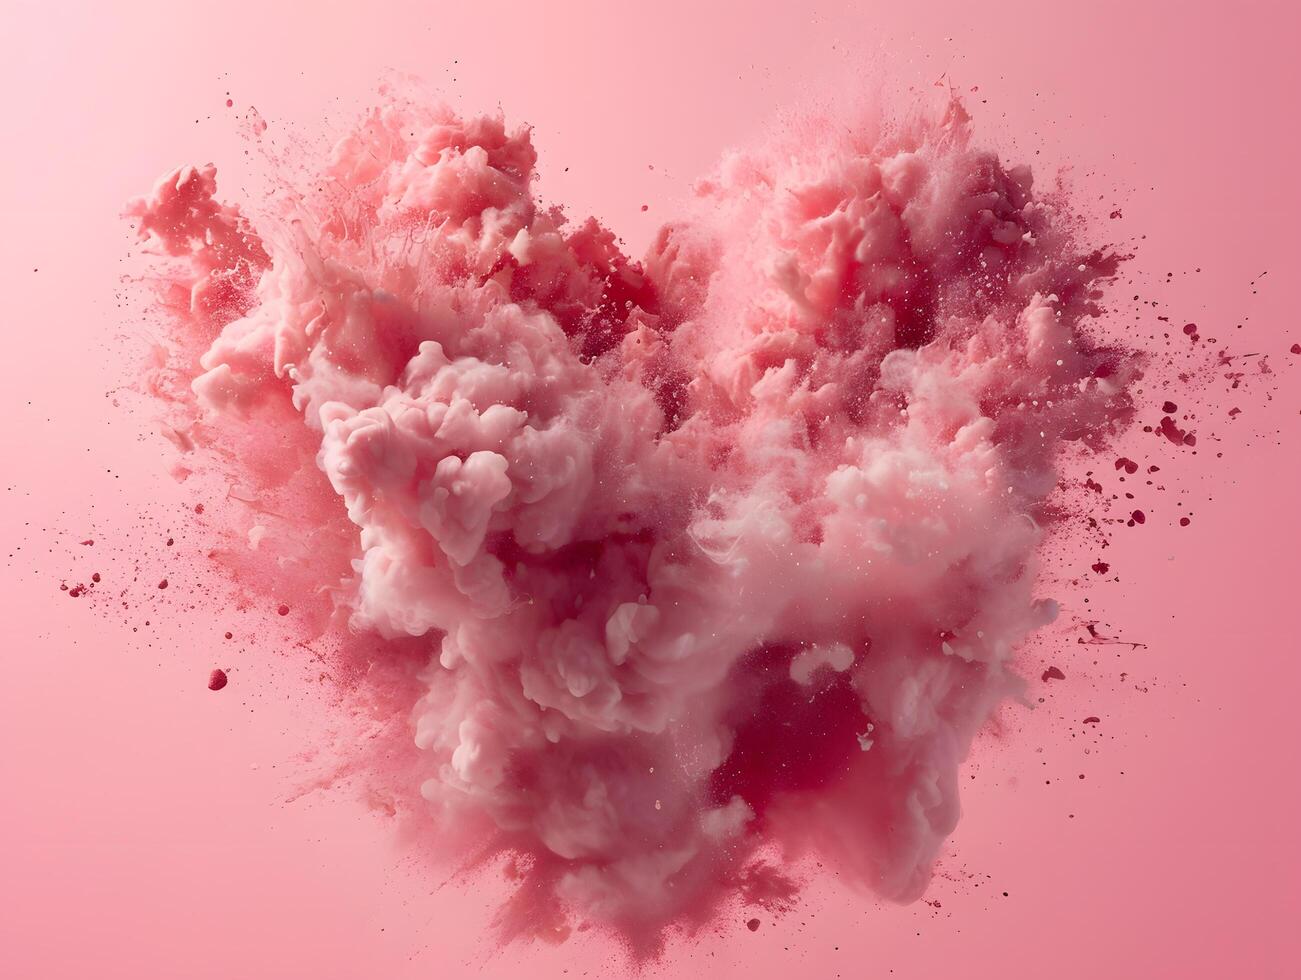 AI generated Romantic Watercolor Love Splash in Pink and Red with Grunge Texture and Ink Drops - Valentine's Day Card Design photo